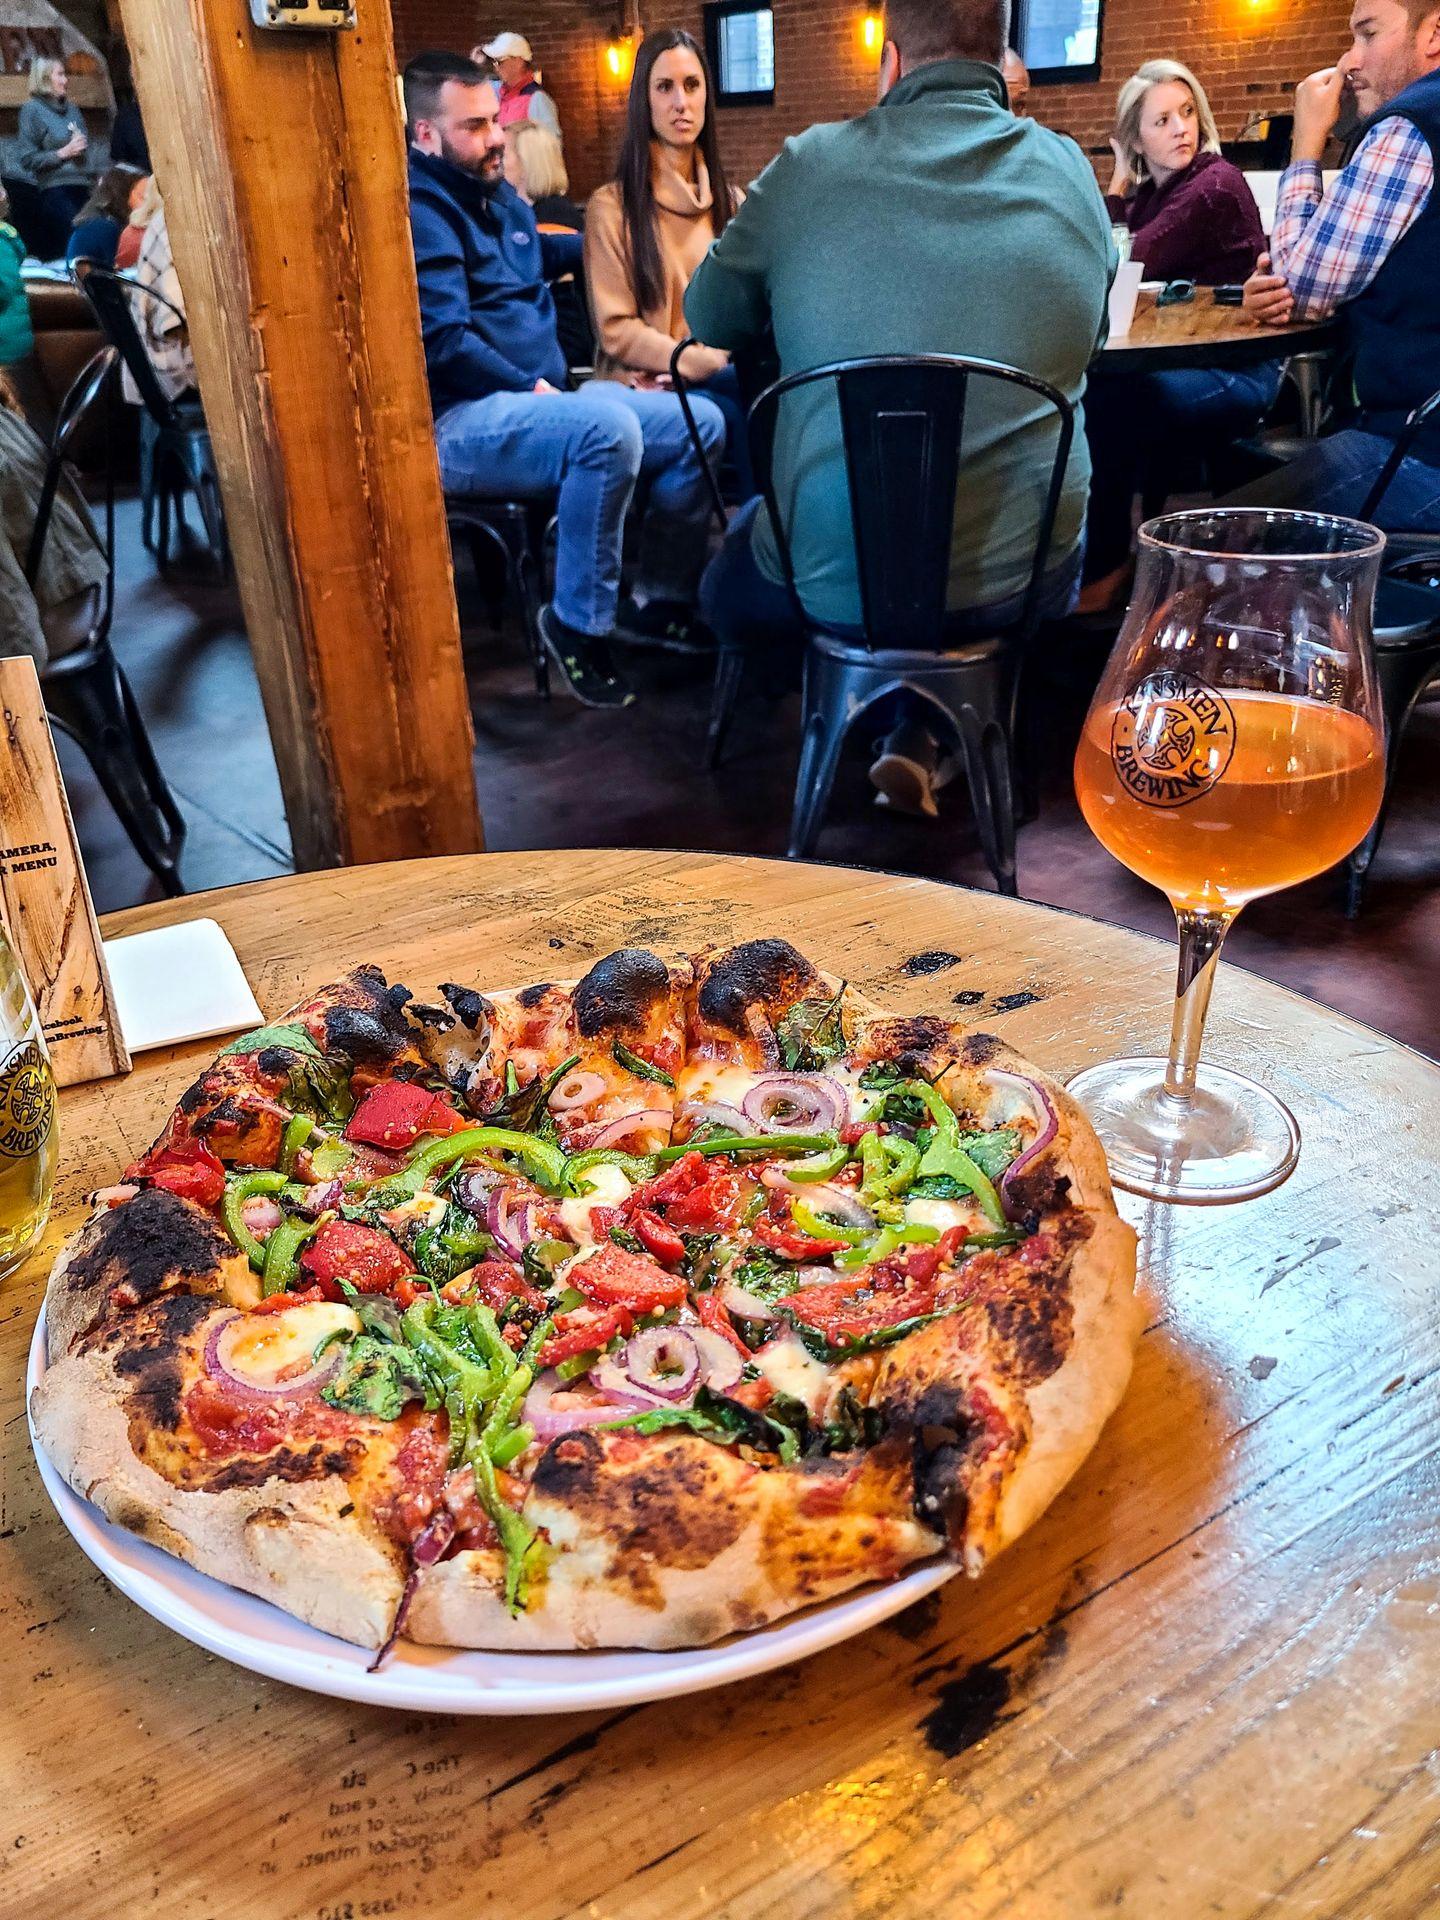 A pizza topped with veggies and a beer in a wine glass next to it on a table.